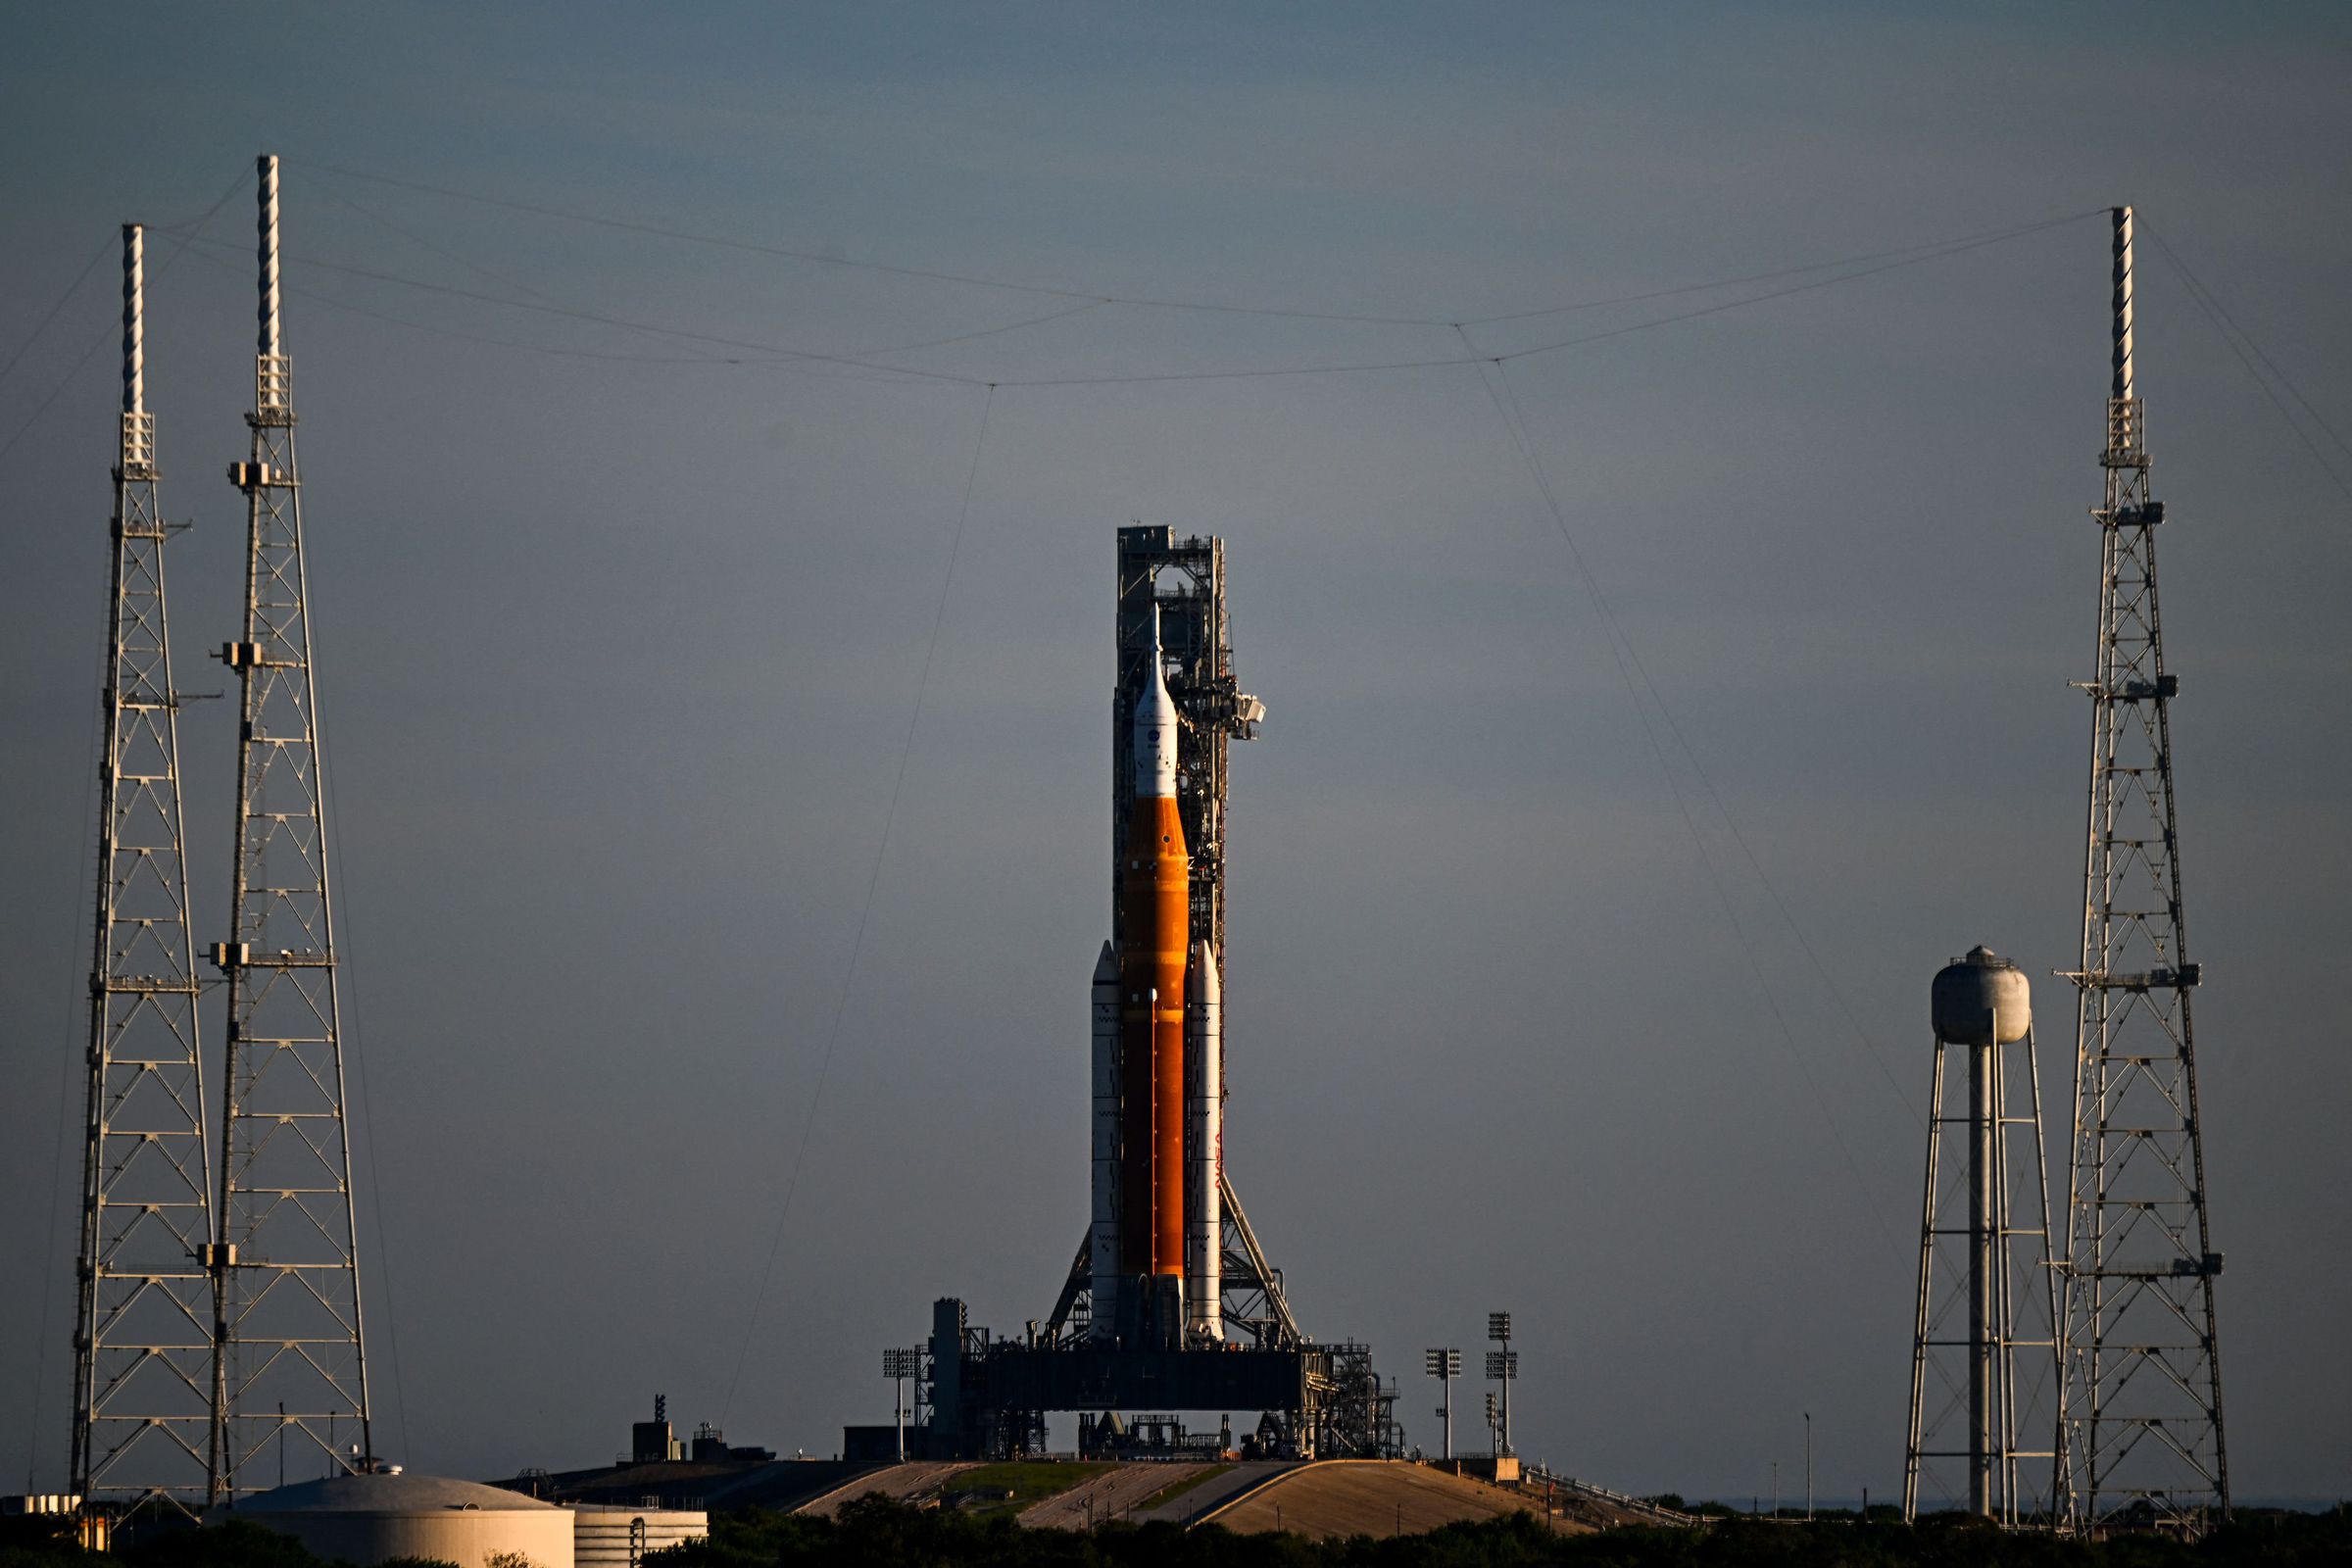 An orange and white rocket sits on a launchpad at the center of a landscape photo.